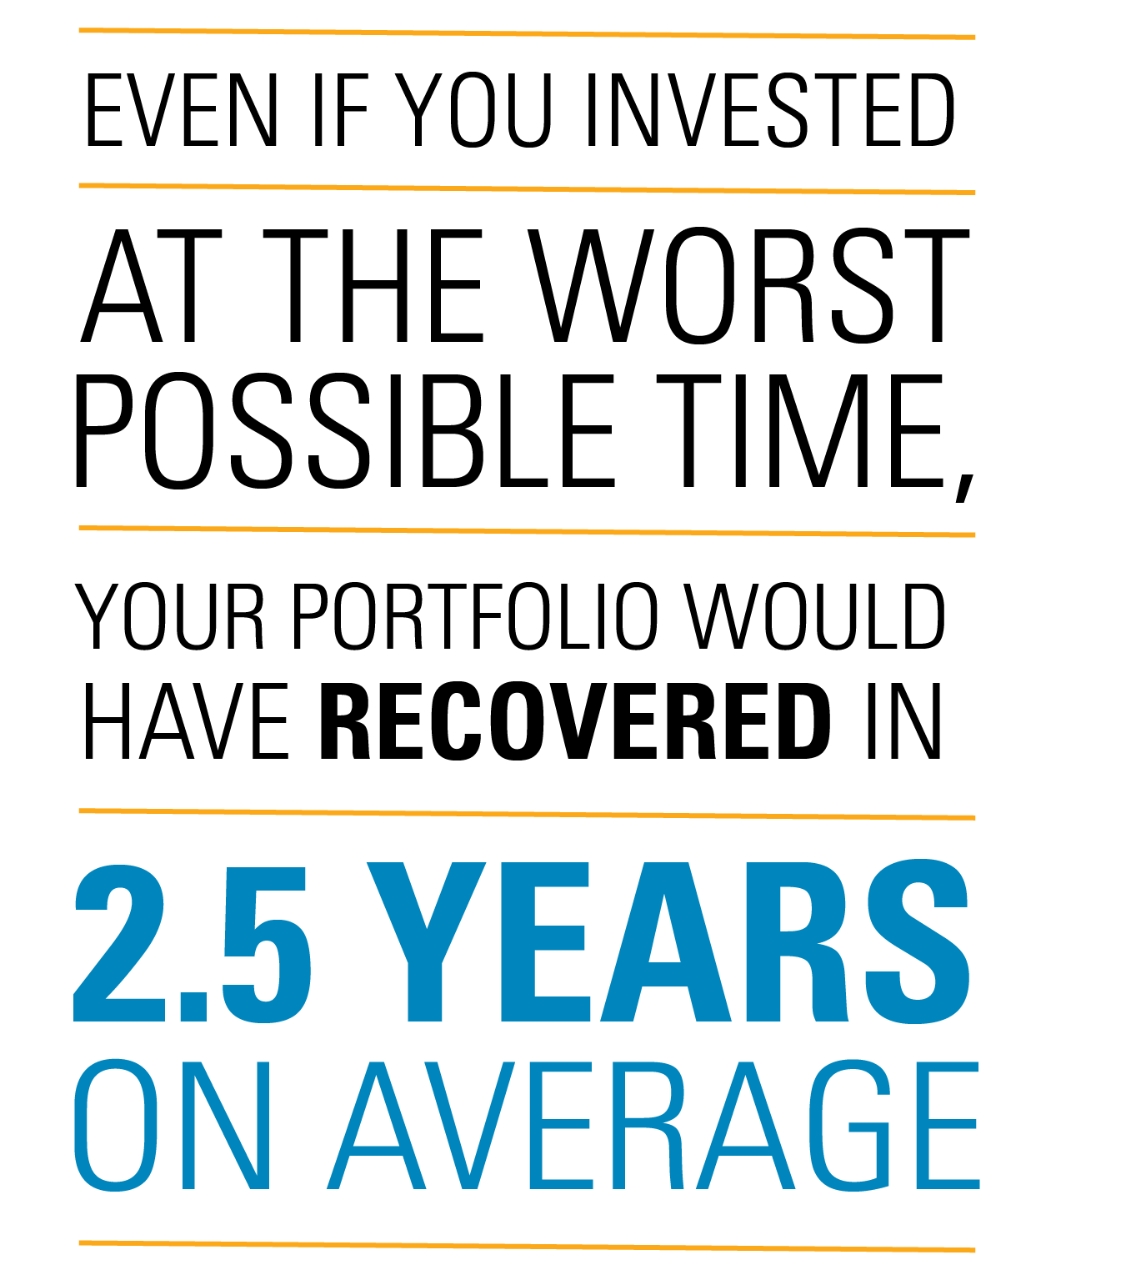 Infographic: Even if you invested at the worst possible time, your portfolio would have recovered in 2.7 years